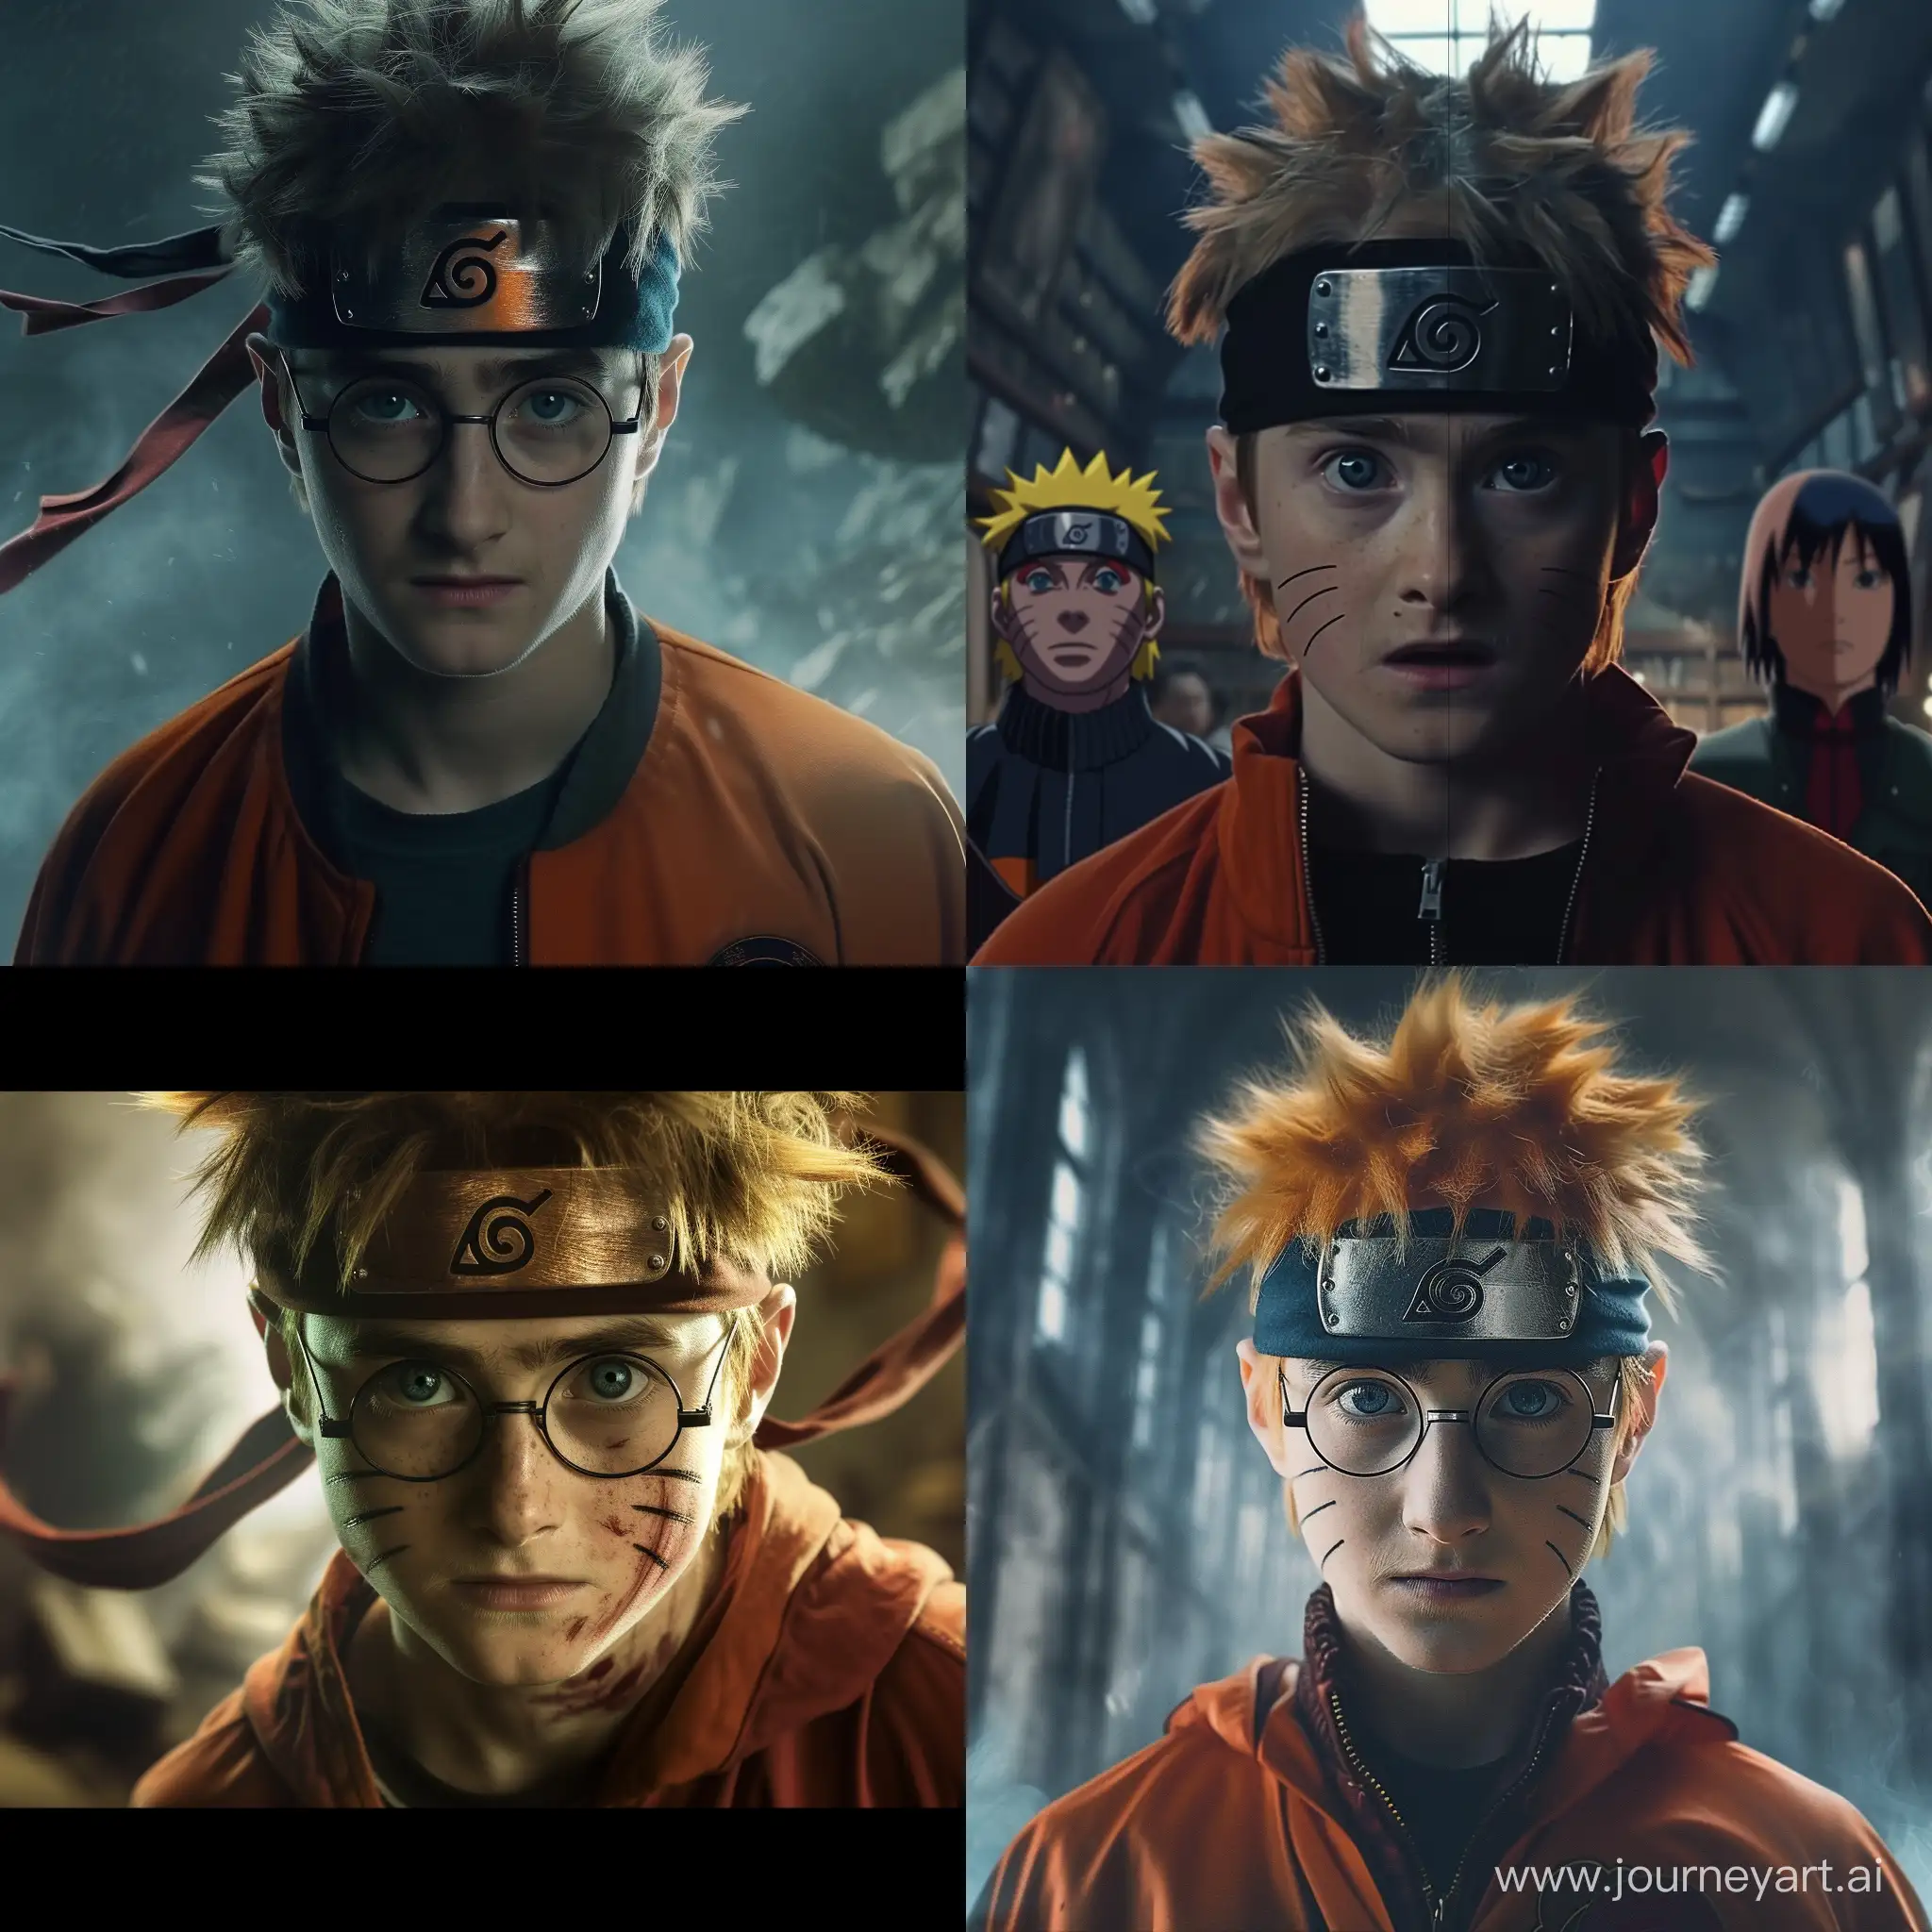 a shot from a movie about Harry Potter and his friends who found themselves in the world of Naruto
